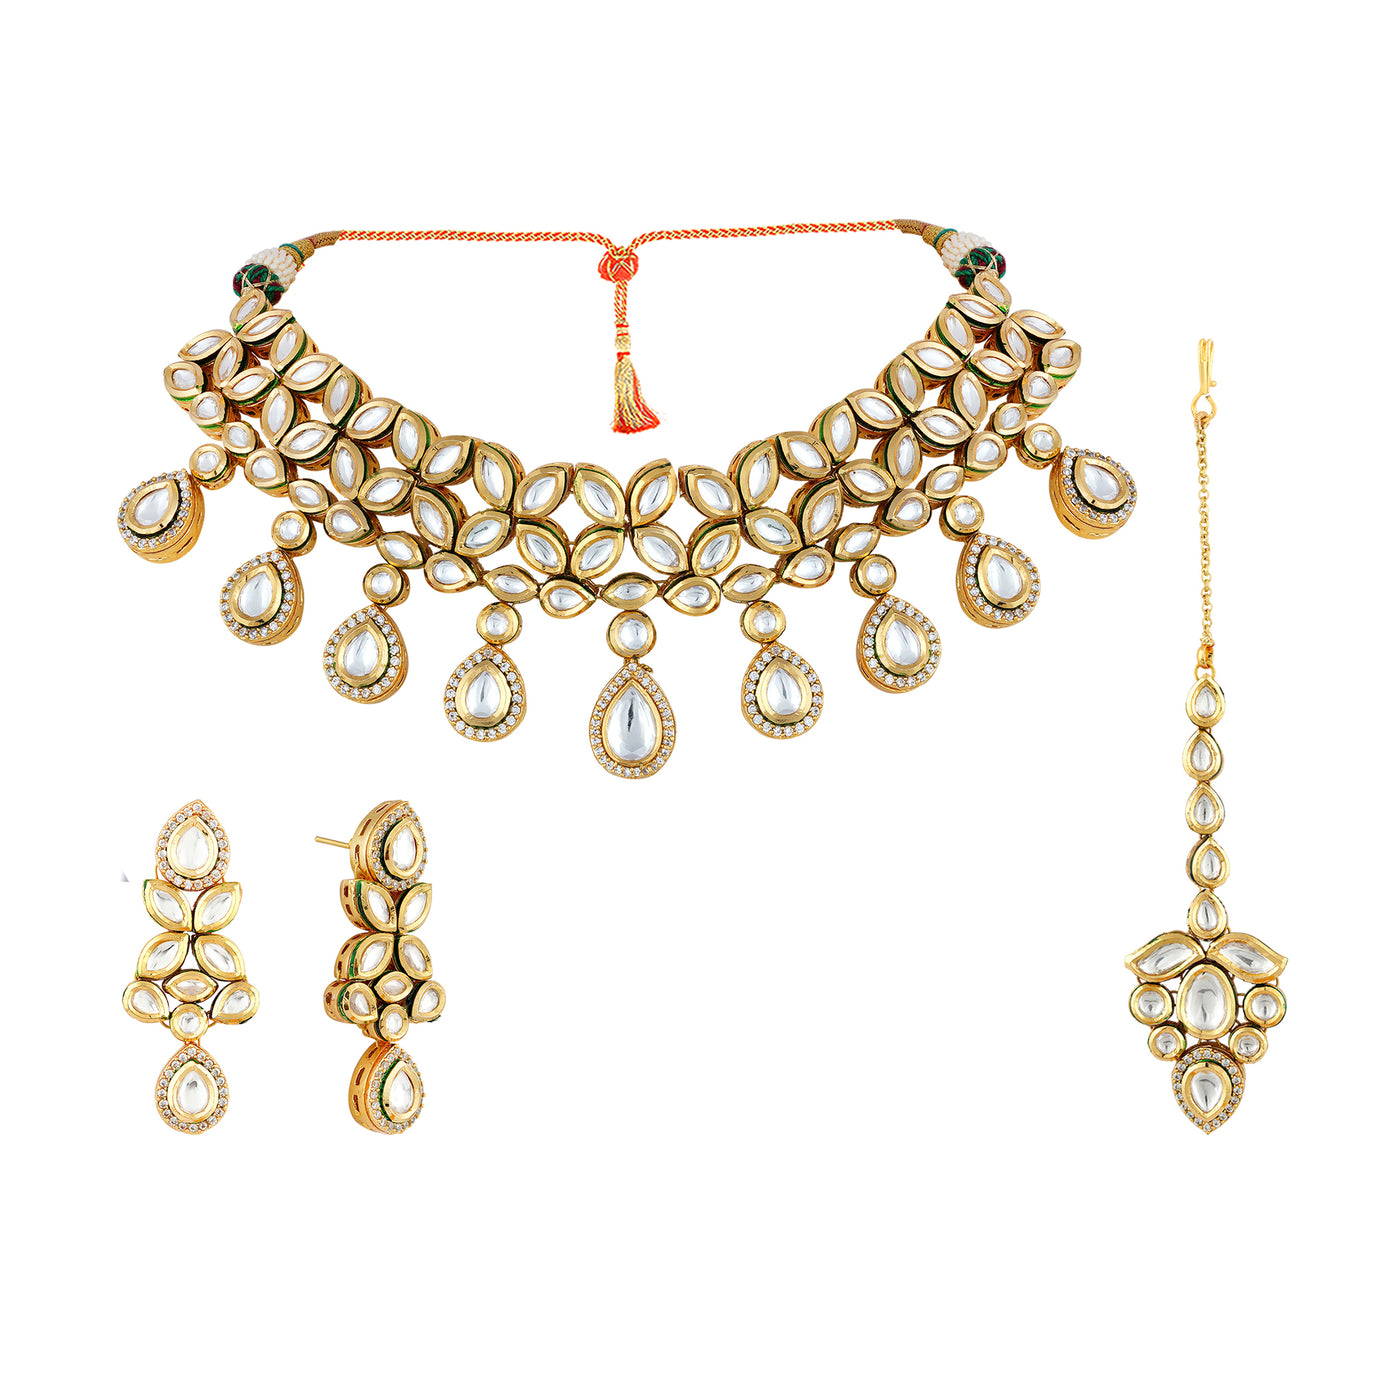 A beautiful choker set in gold plated kundan stones with matching earrings and tikka.